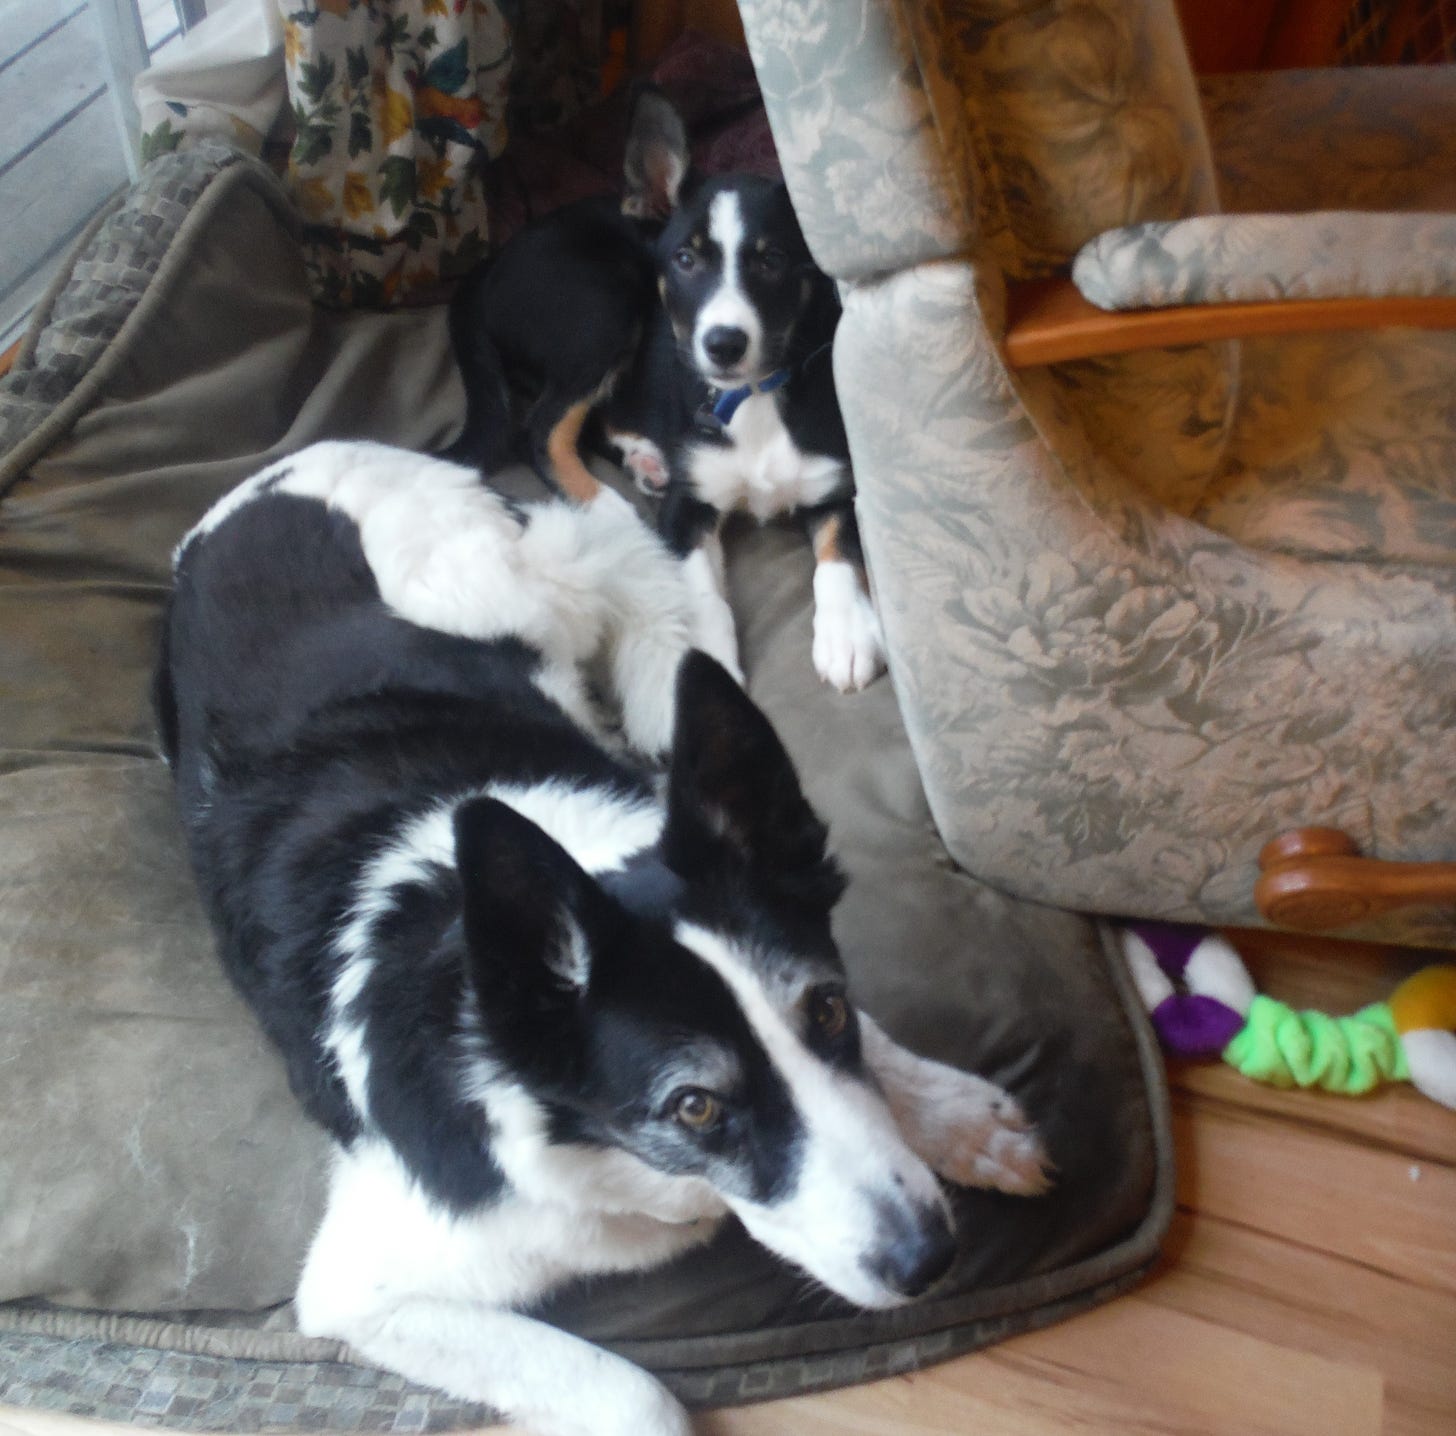 Two border collies lying together, one old, one young